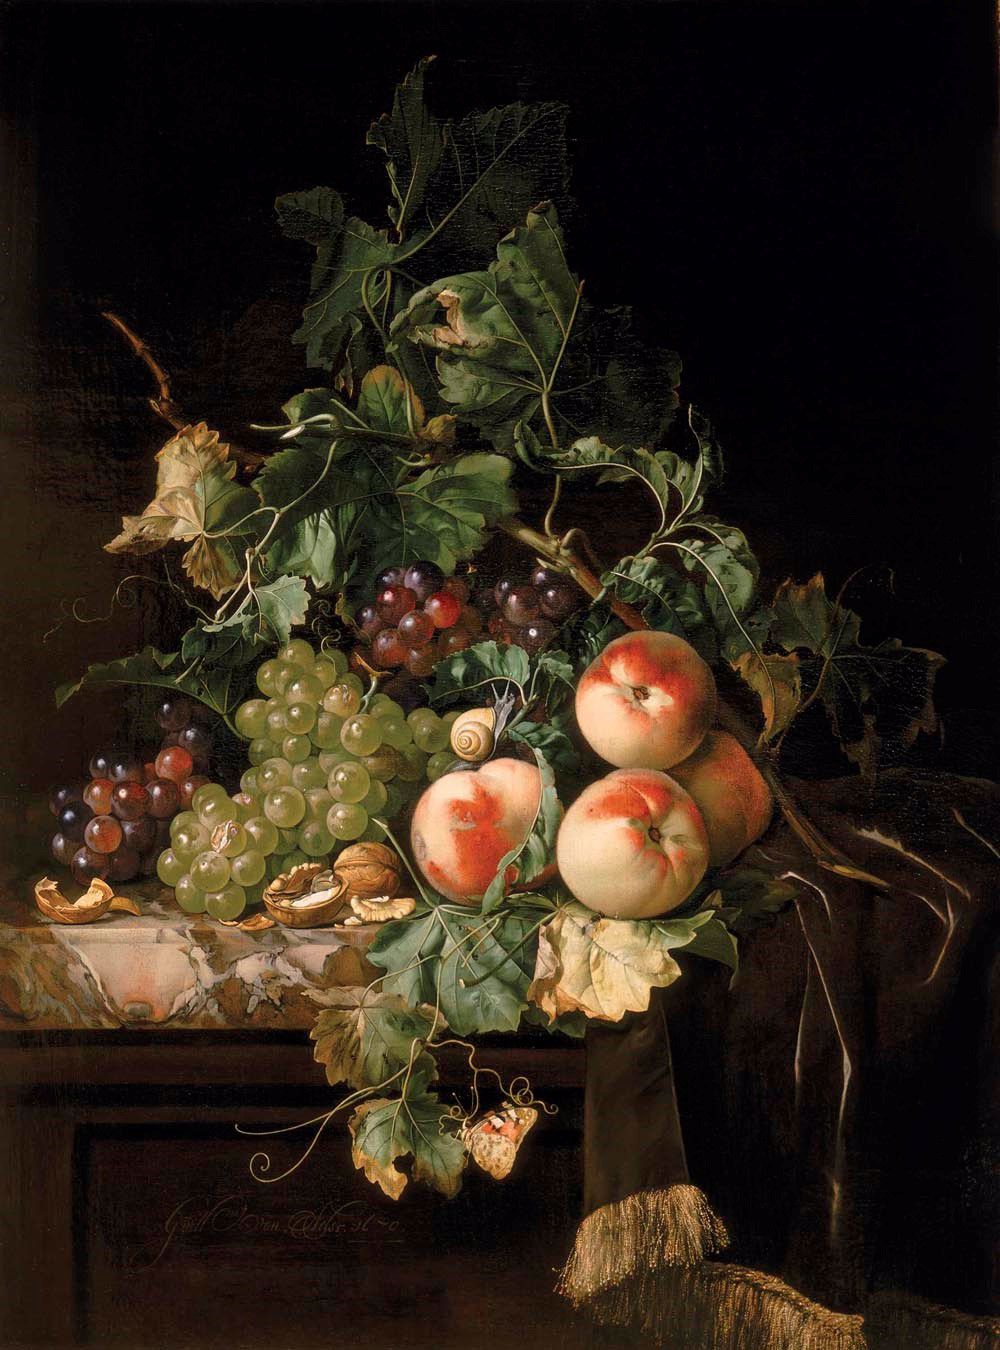 The History of the Still Life: Creating Romance in the Everyday